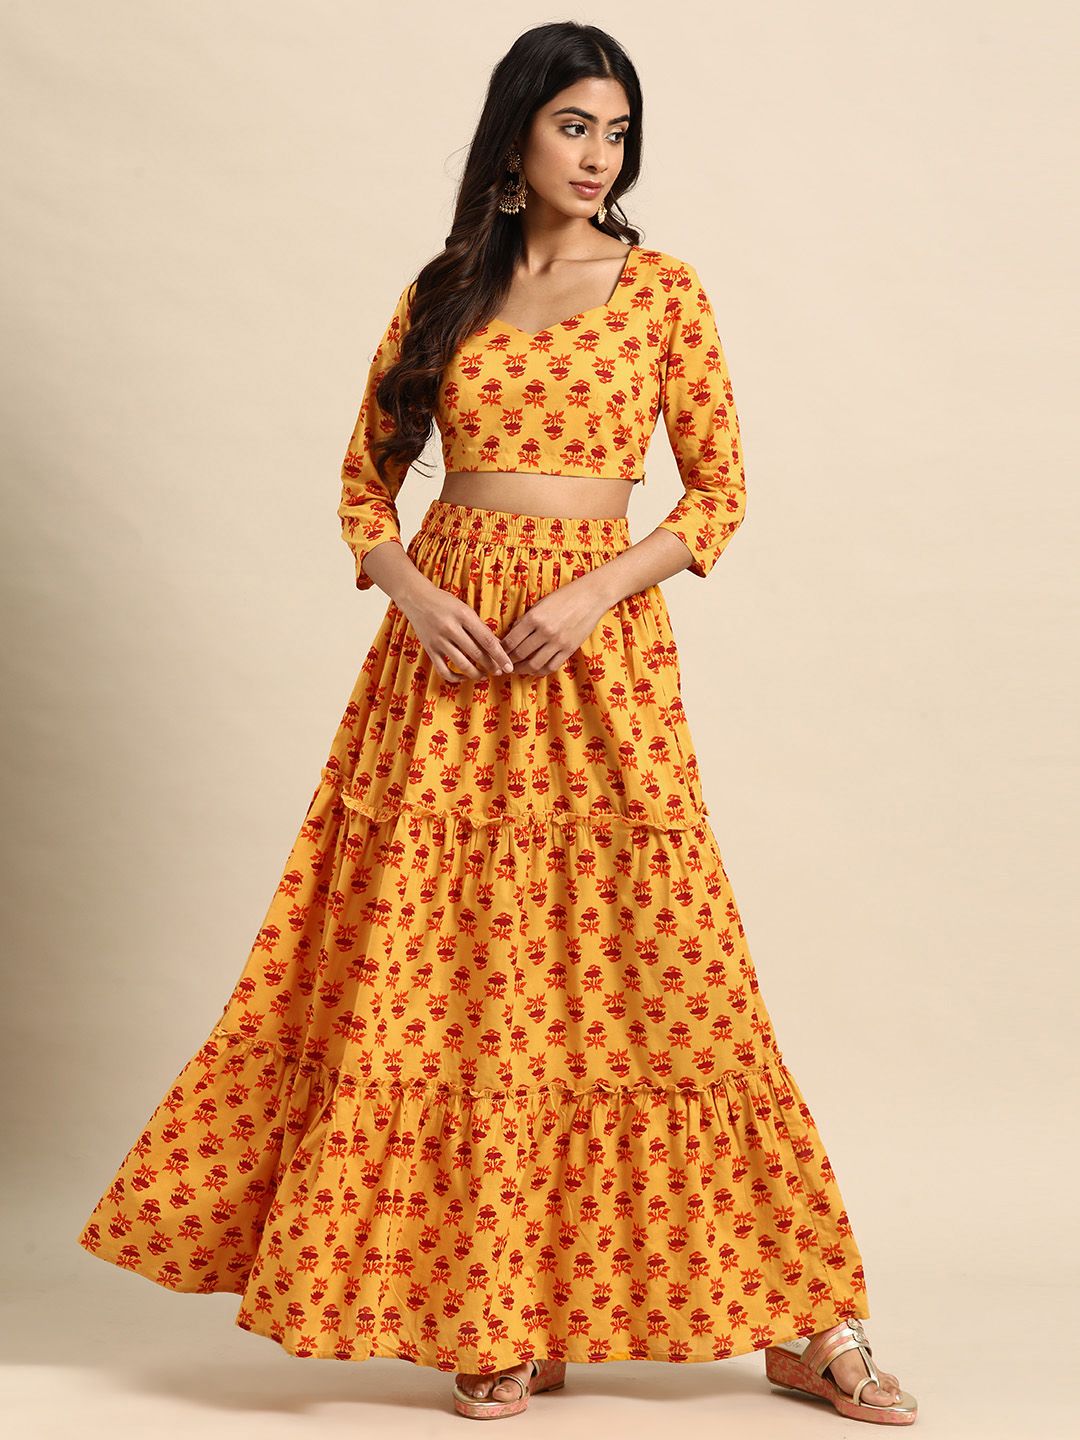 all about you Cotton Printed Ready to Wear Lehenga Choli Price in India